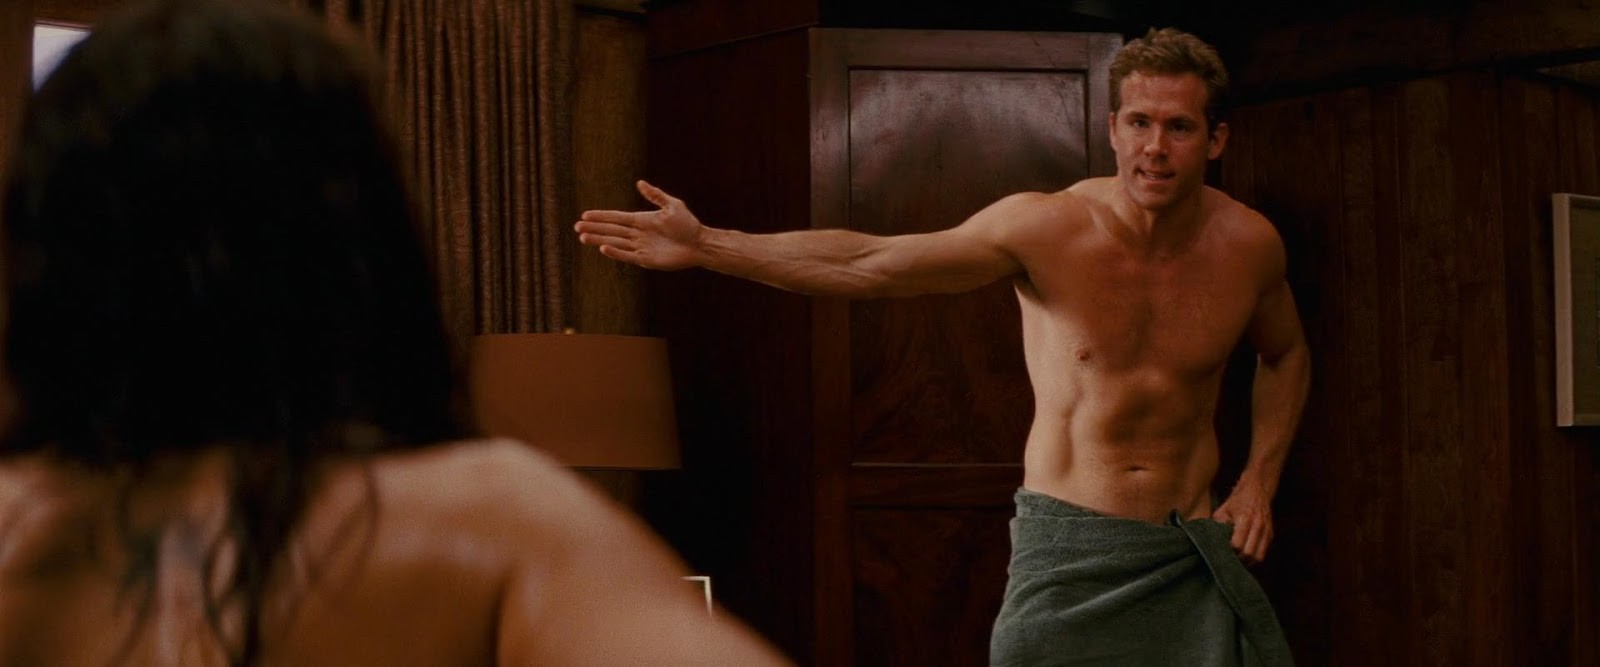 Ryan Reynolds in "Ricatto d'amore" (2009) .